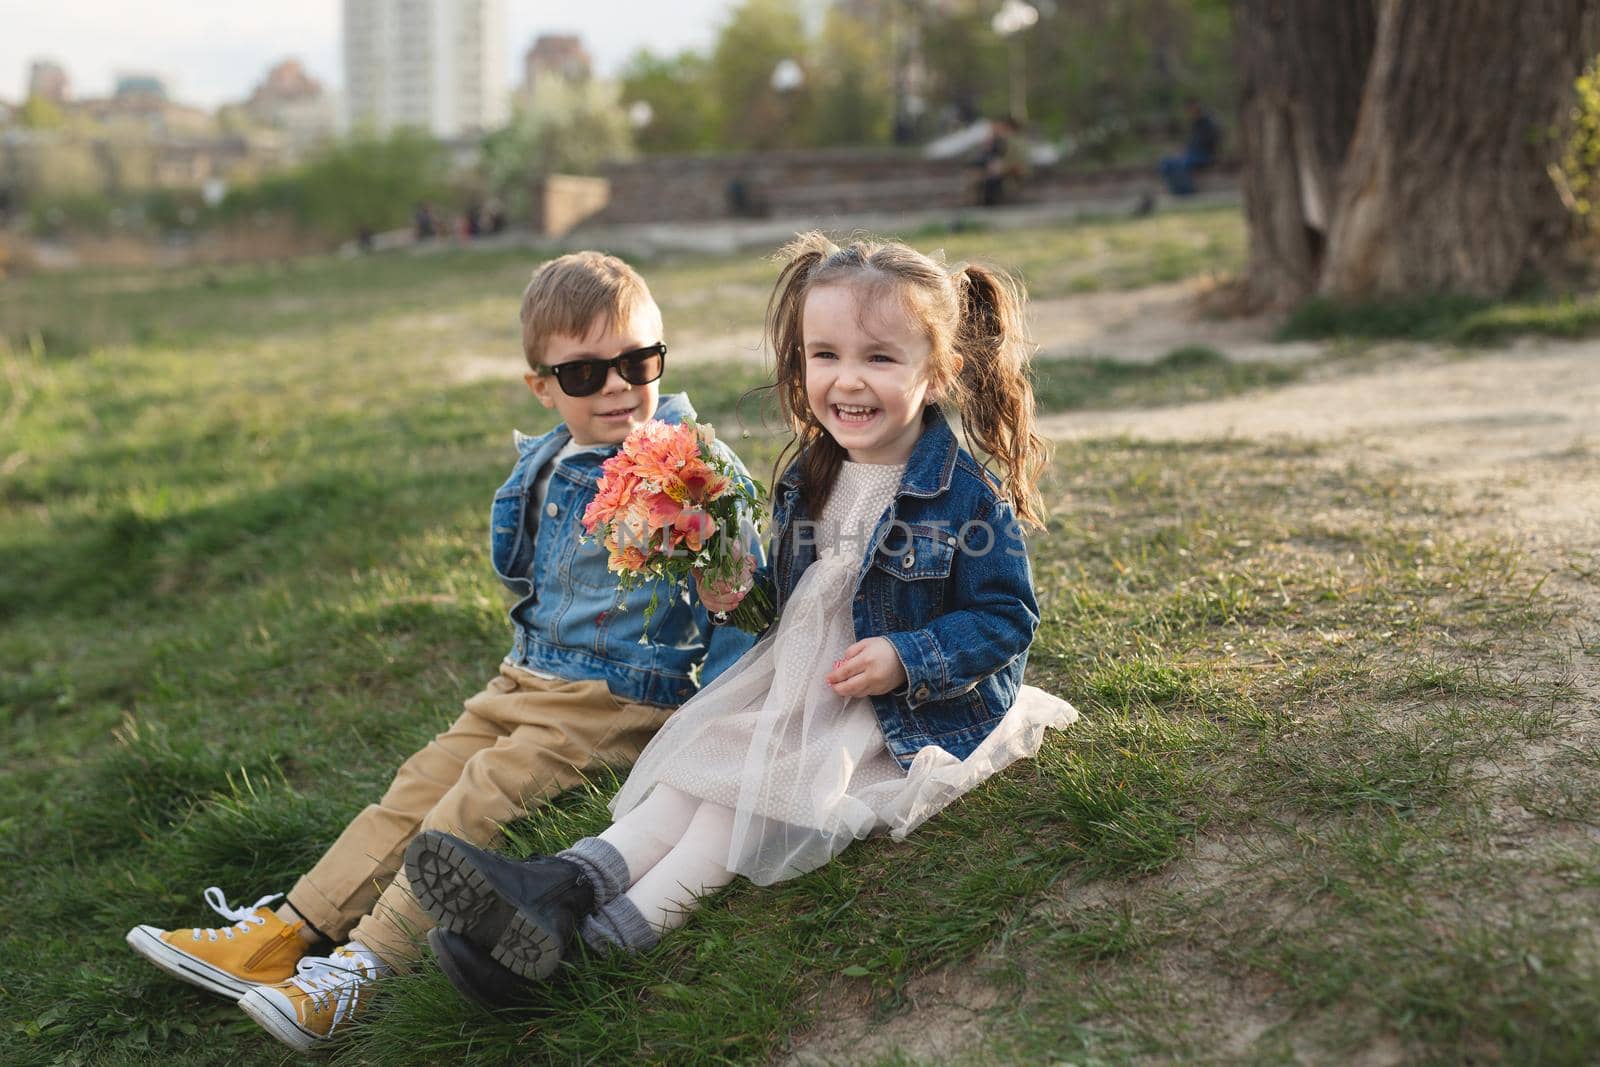 A little happy cute boy and a little cute girl are sitting on the grass in a beautiful place with a bouquet of flowers.